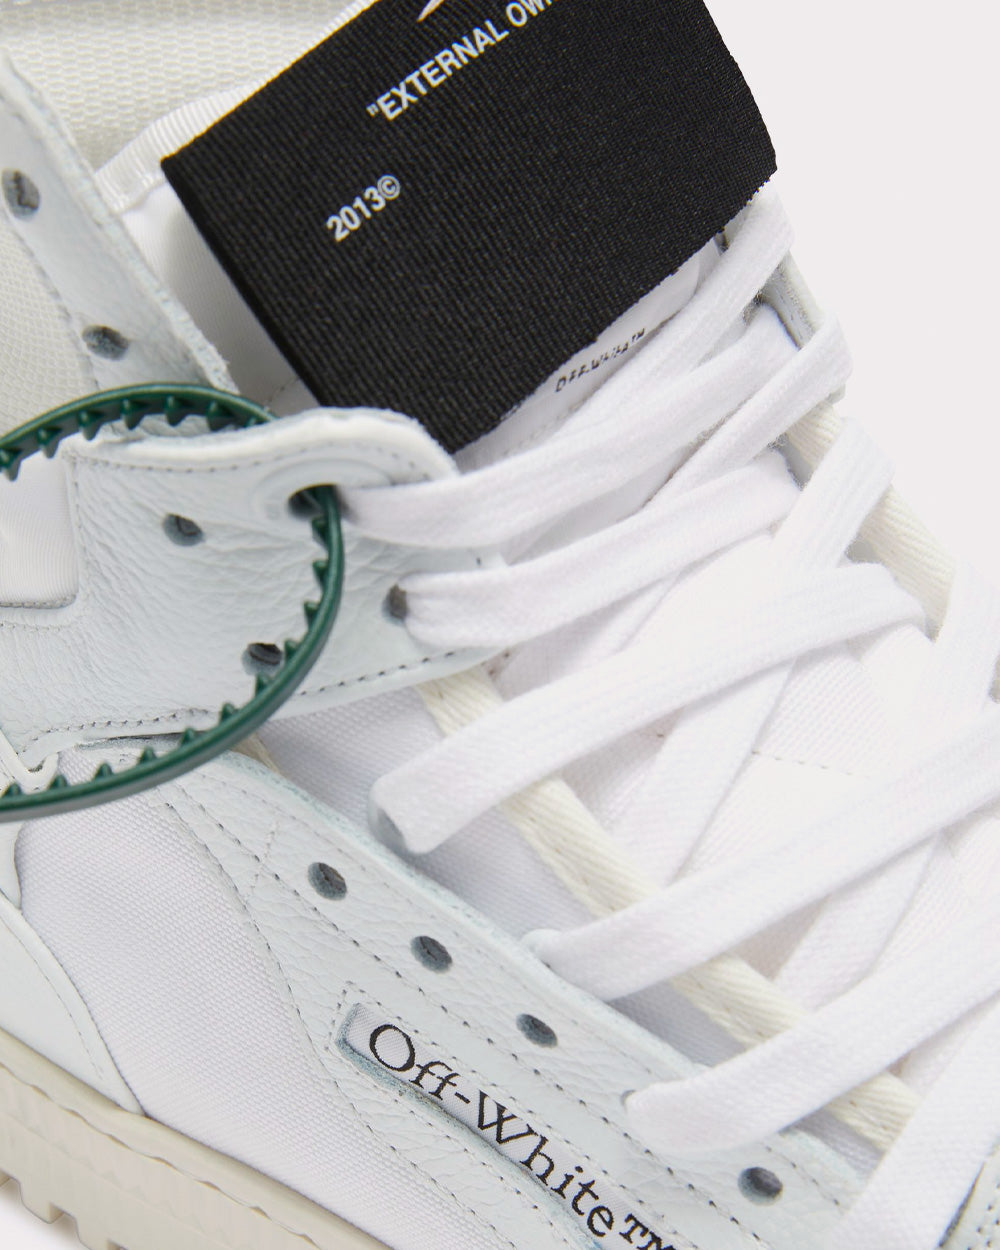 Off-White - Off-Court 3.0 White / Black High Top Sneakers